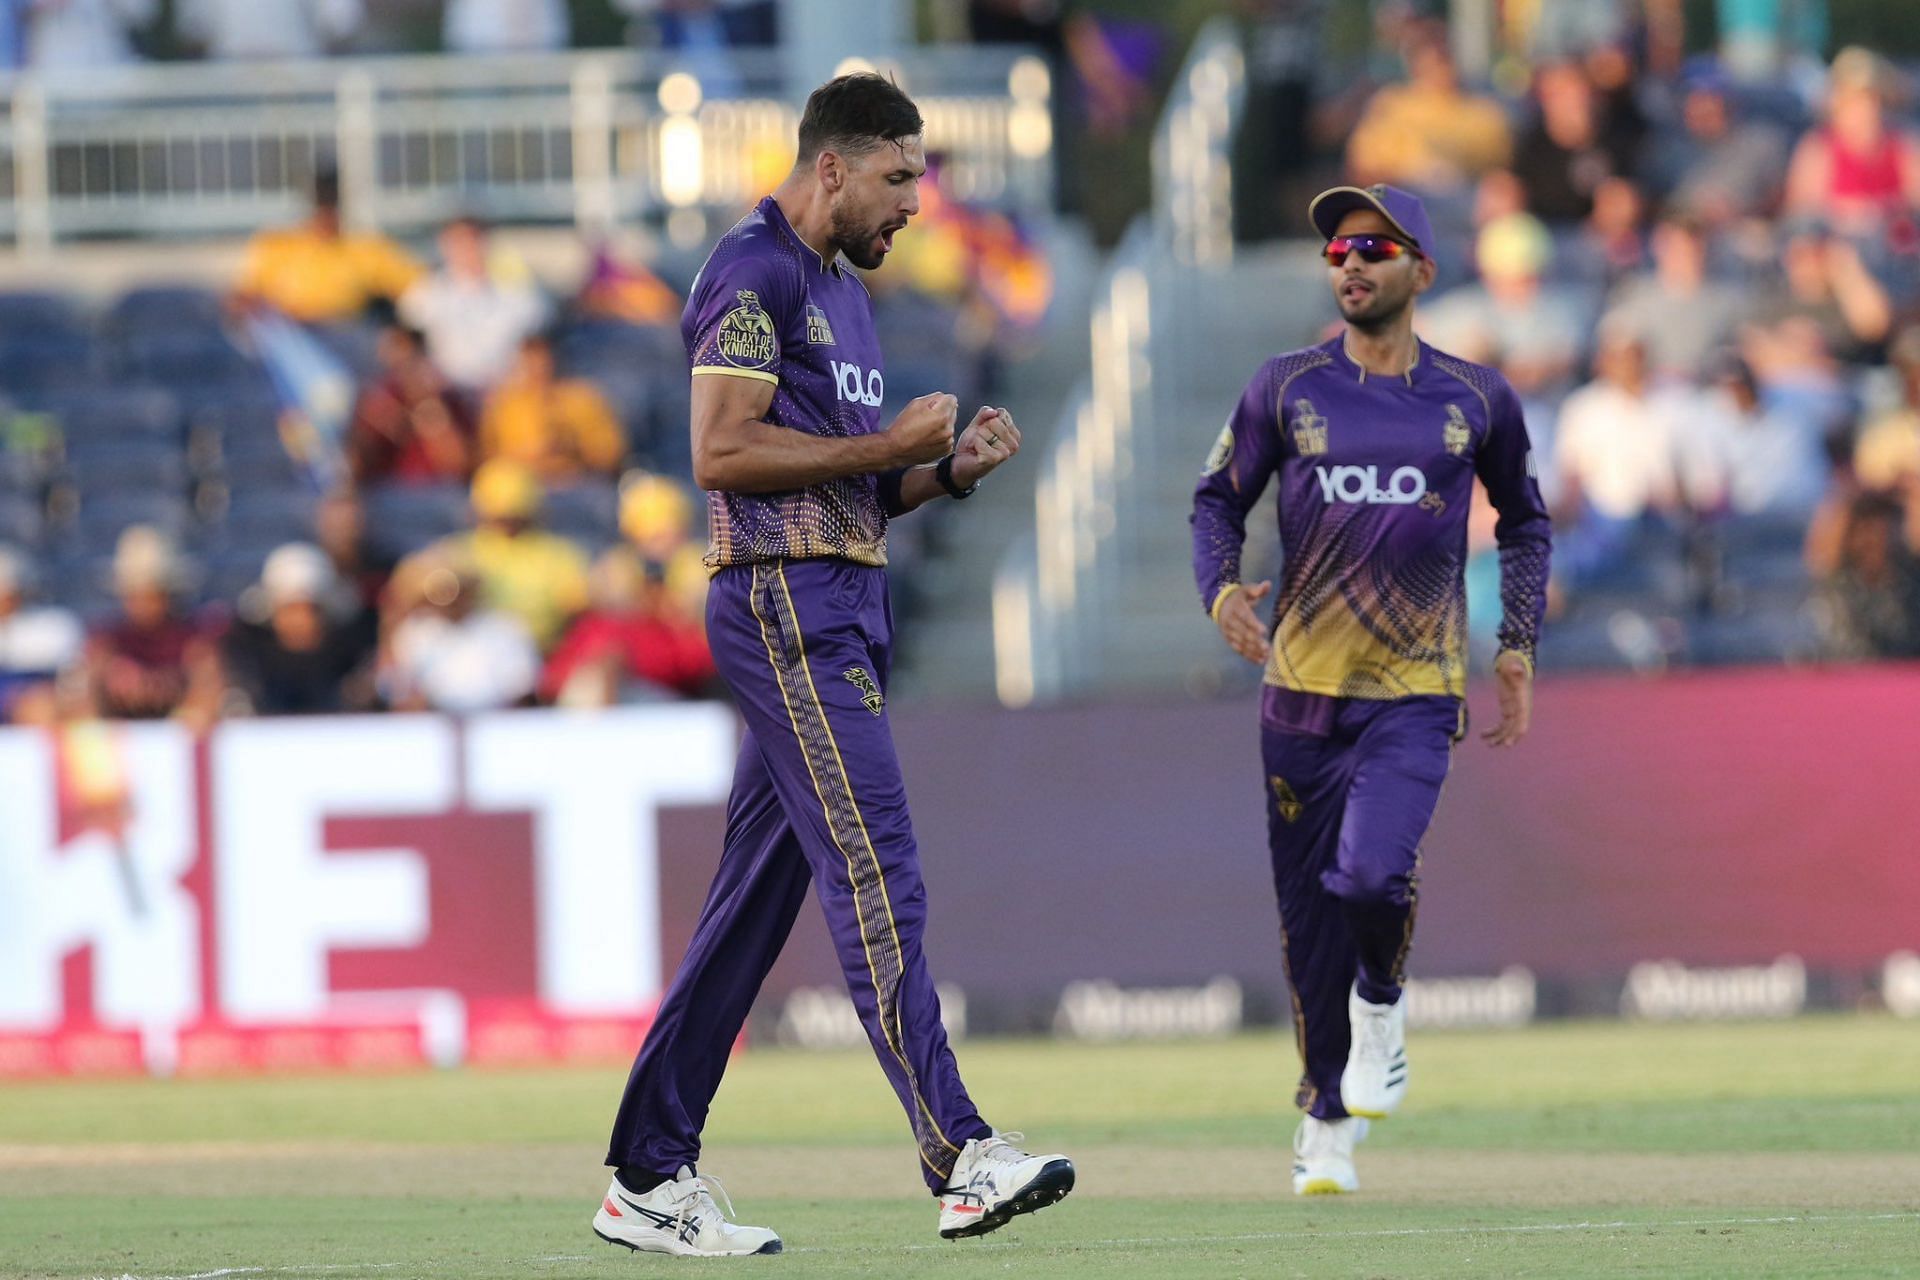 Los Angeles Knight Riders in action (Image Courtesy: Twitter/Major League Cricket)